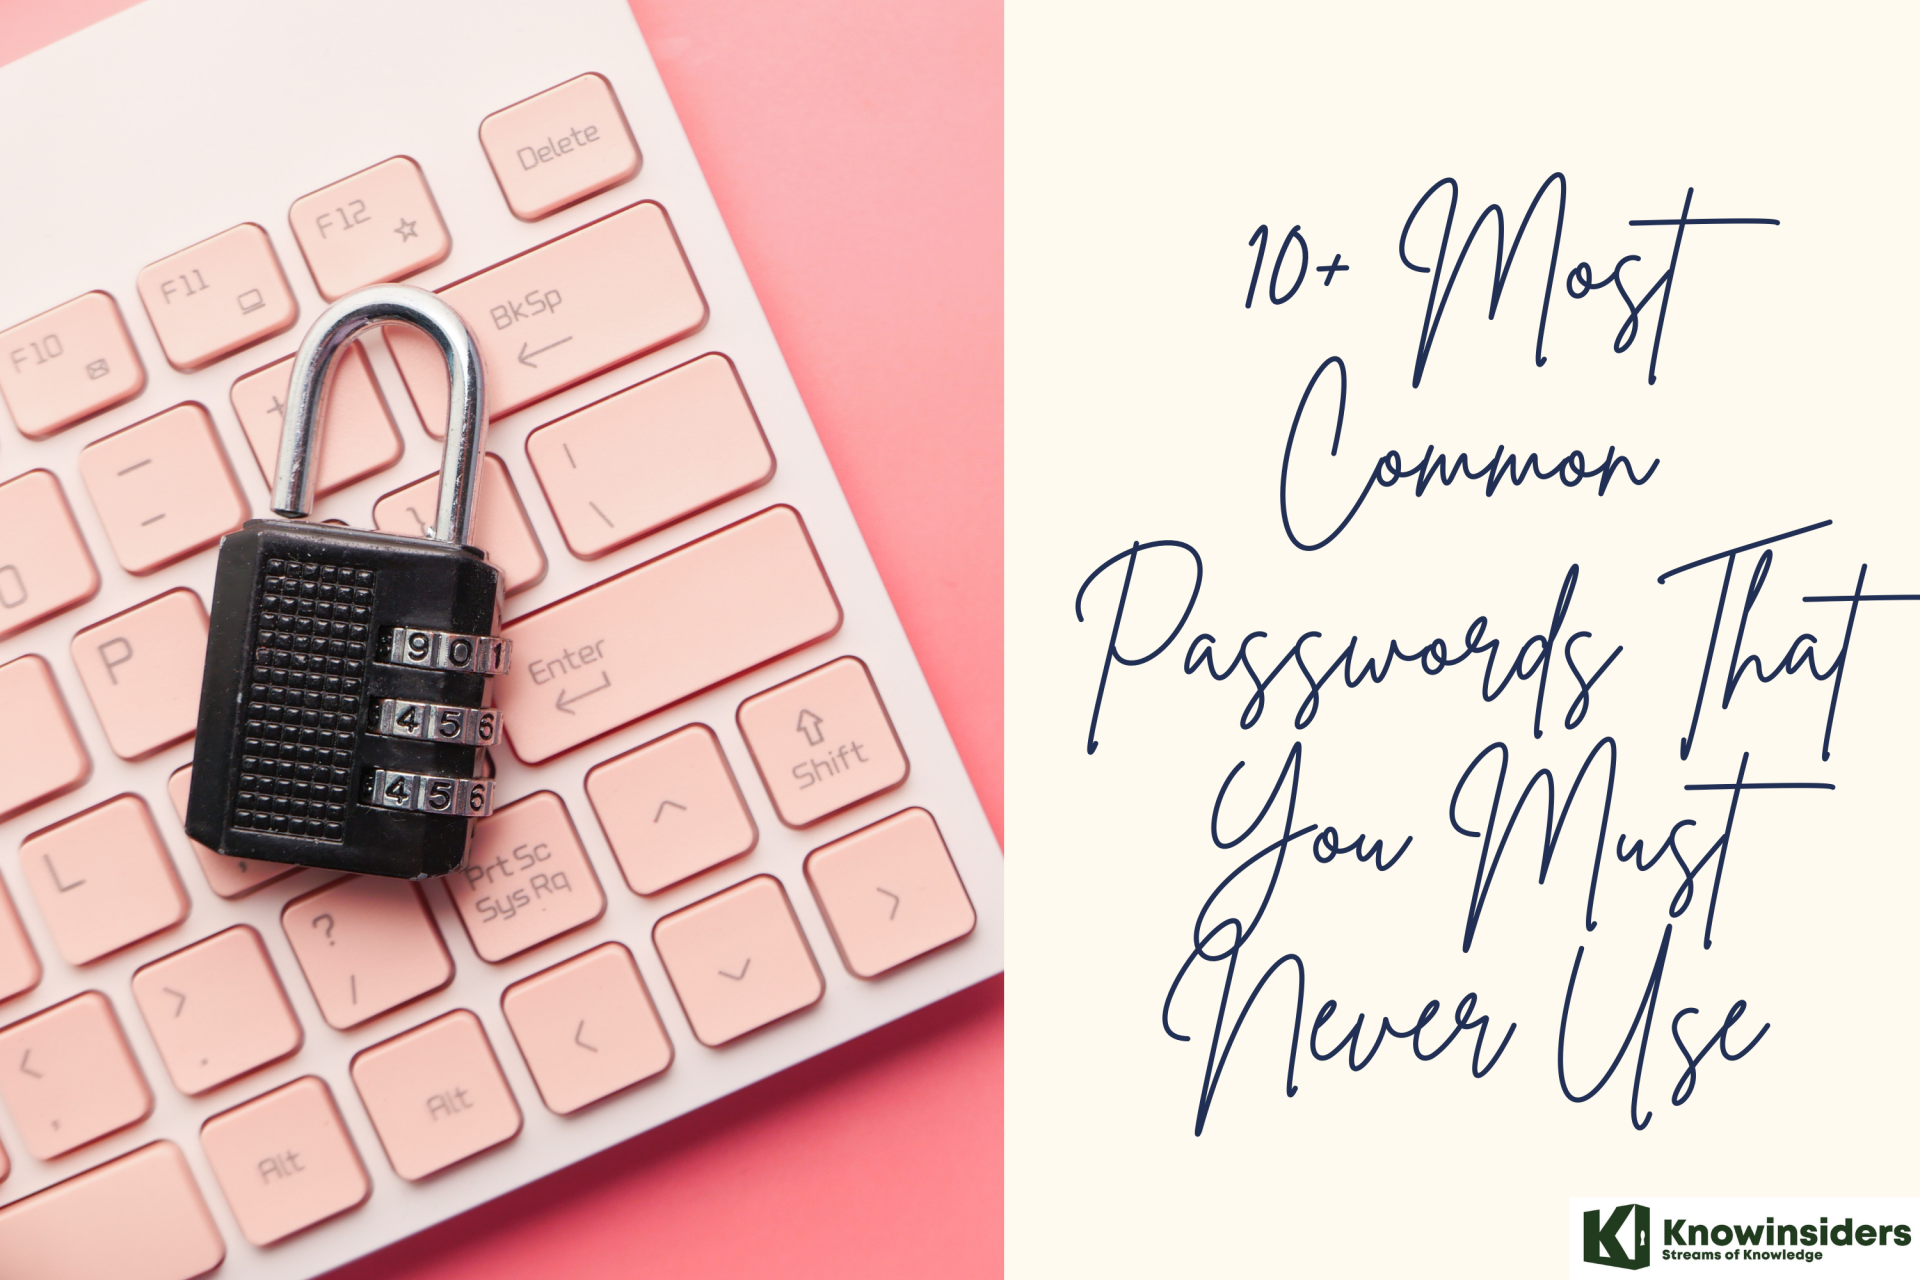 10 most common passwords that you never use